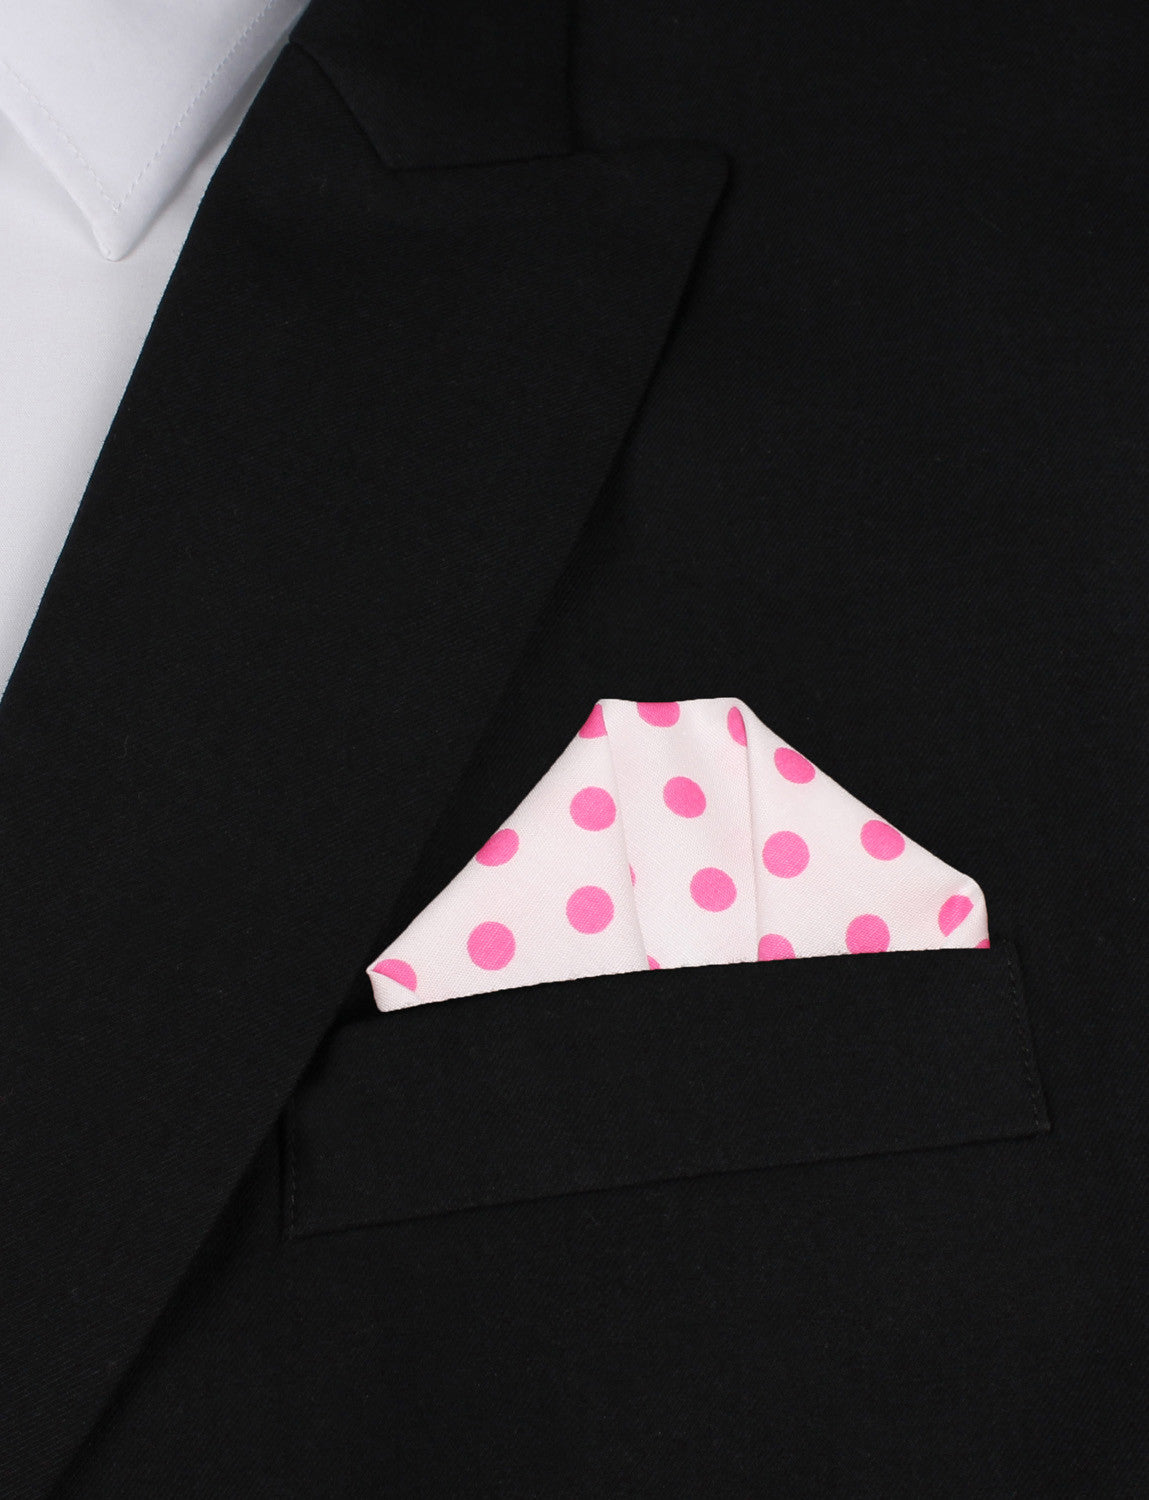 White Cotton with Large Hot Pink Polka Dots Winged Puff Pocket Square Fold